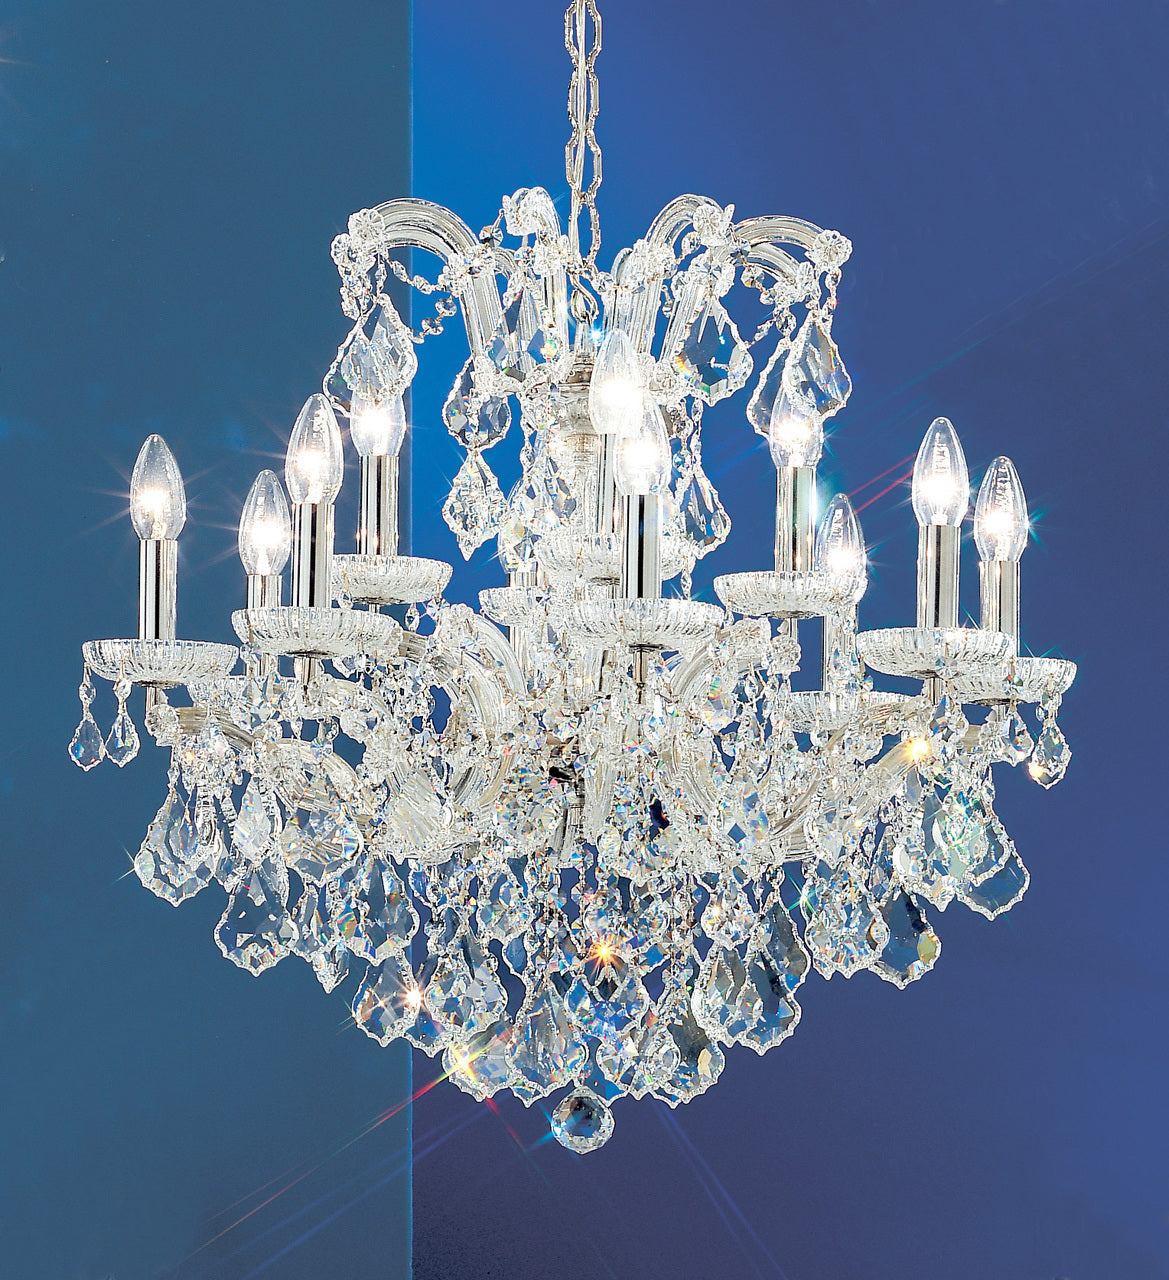 Classic Lighting 8132 CH SC Maria Theresa Traditional Crystal Chandelier in Chrome (Imported from Italy)